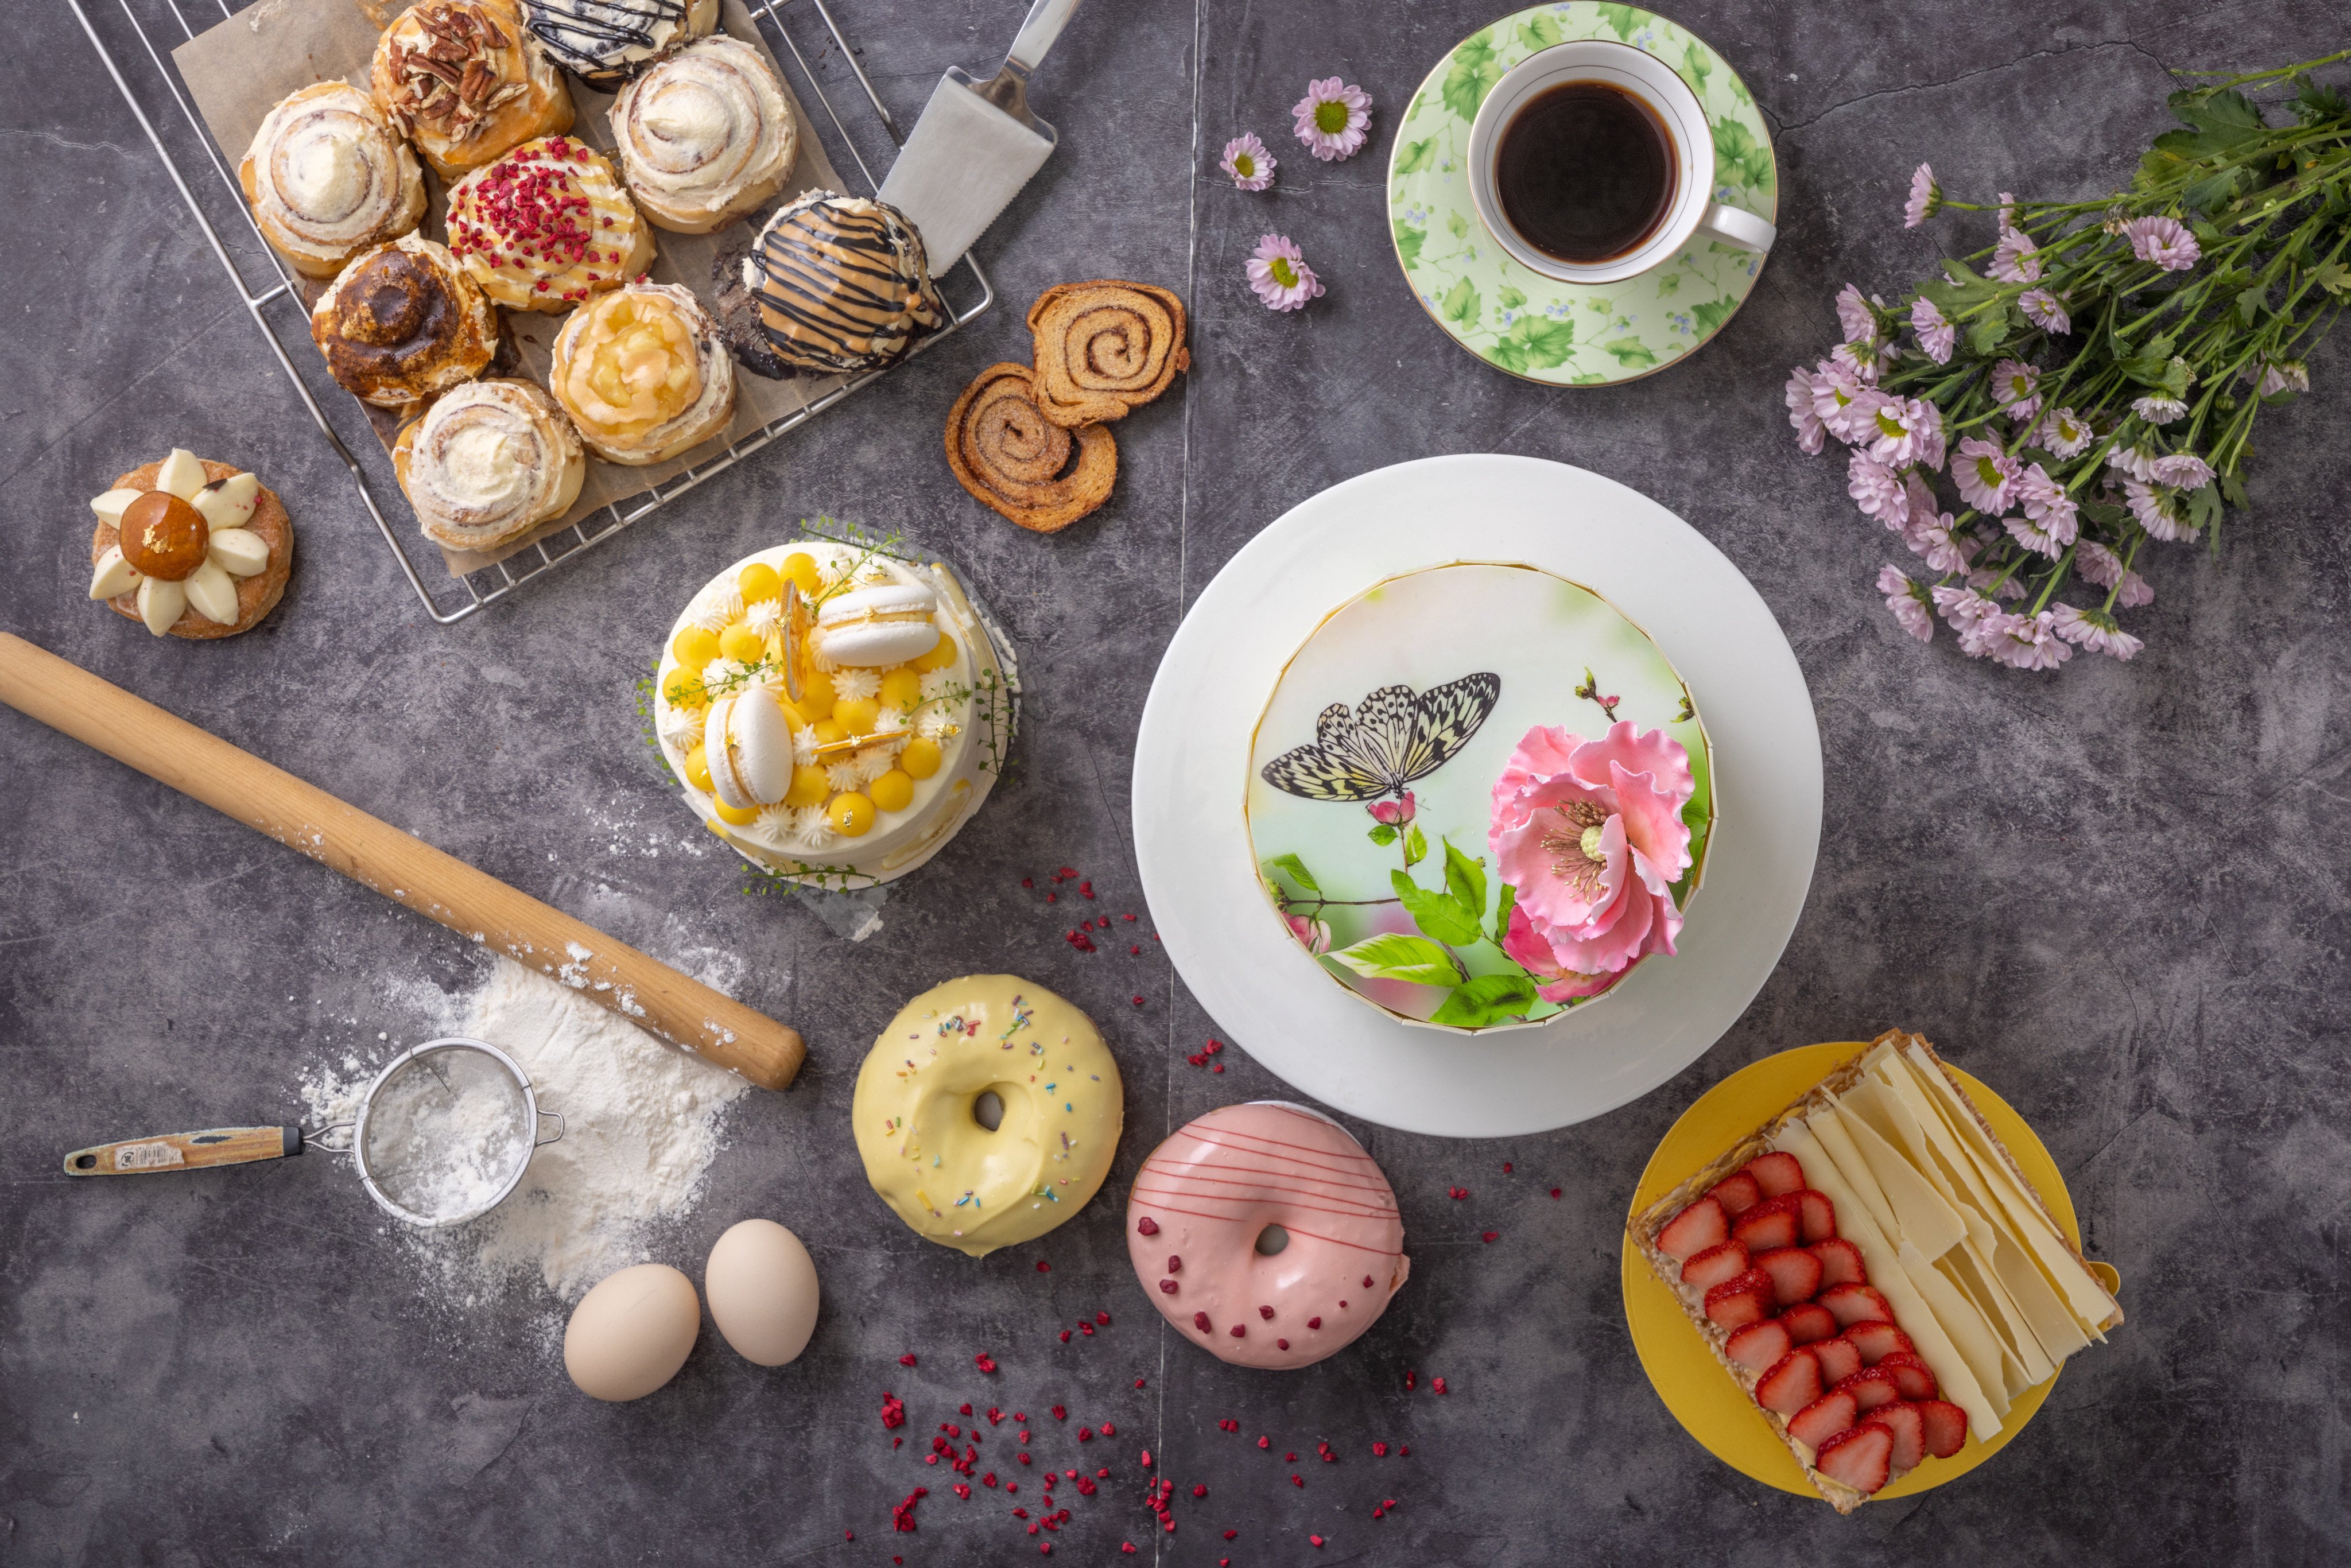 Desserts that go easy on the sugar. Photo: Kenny Wong